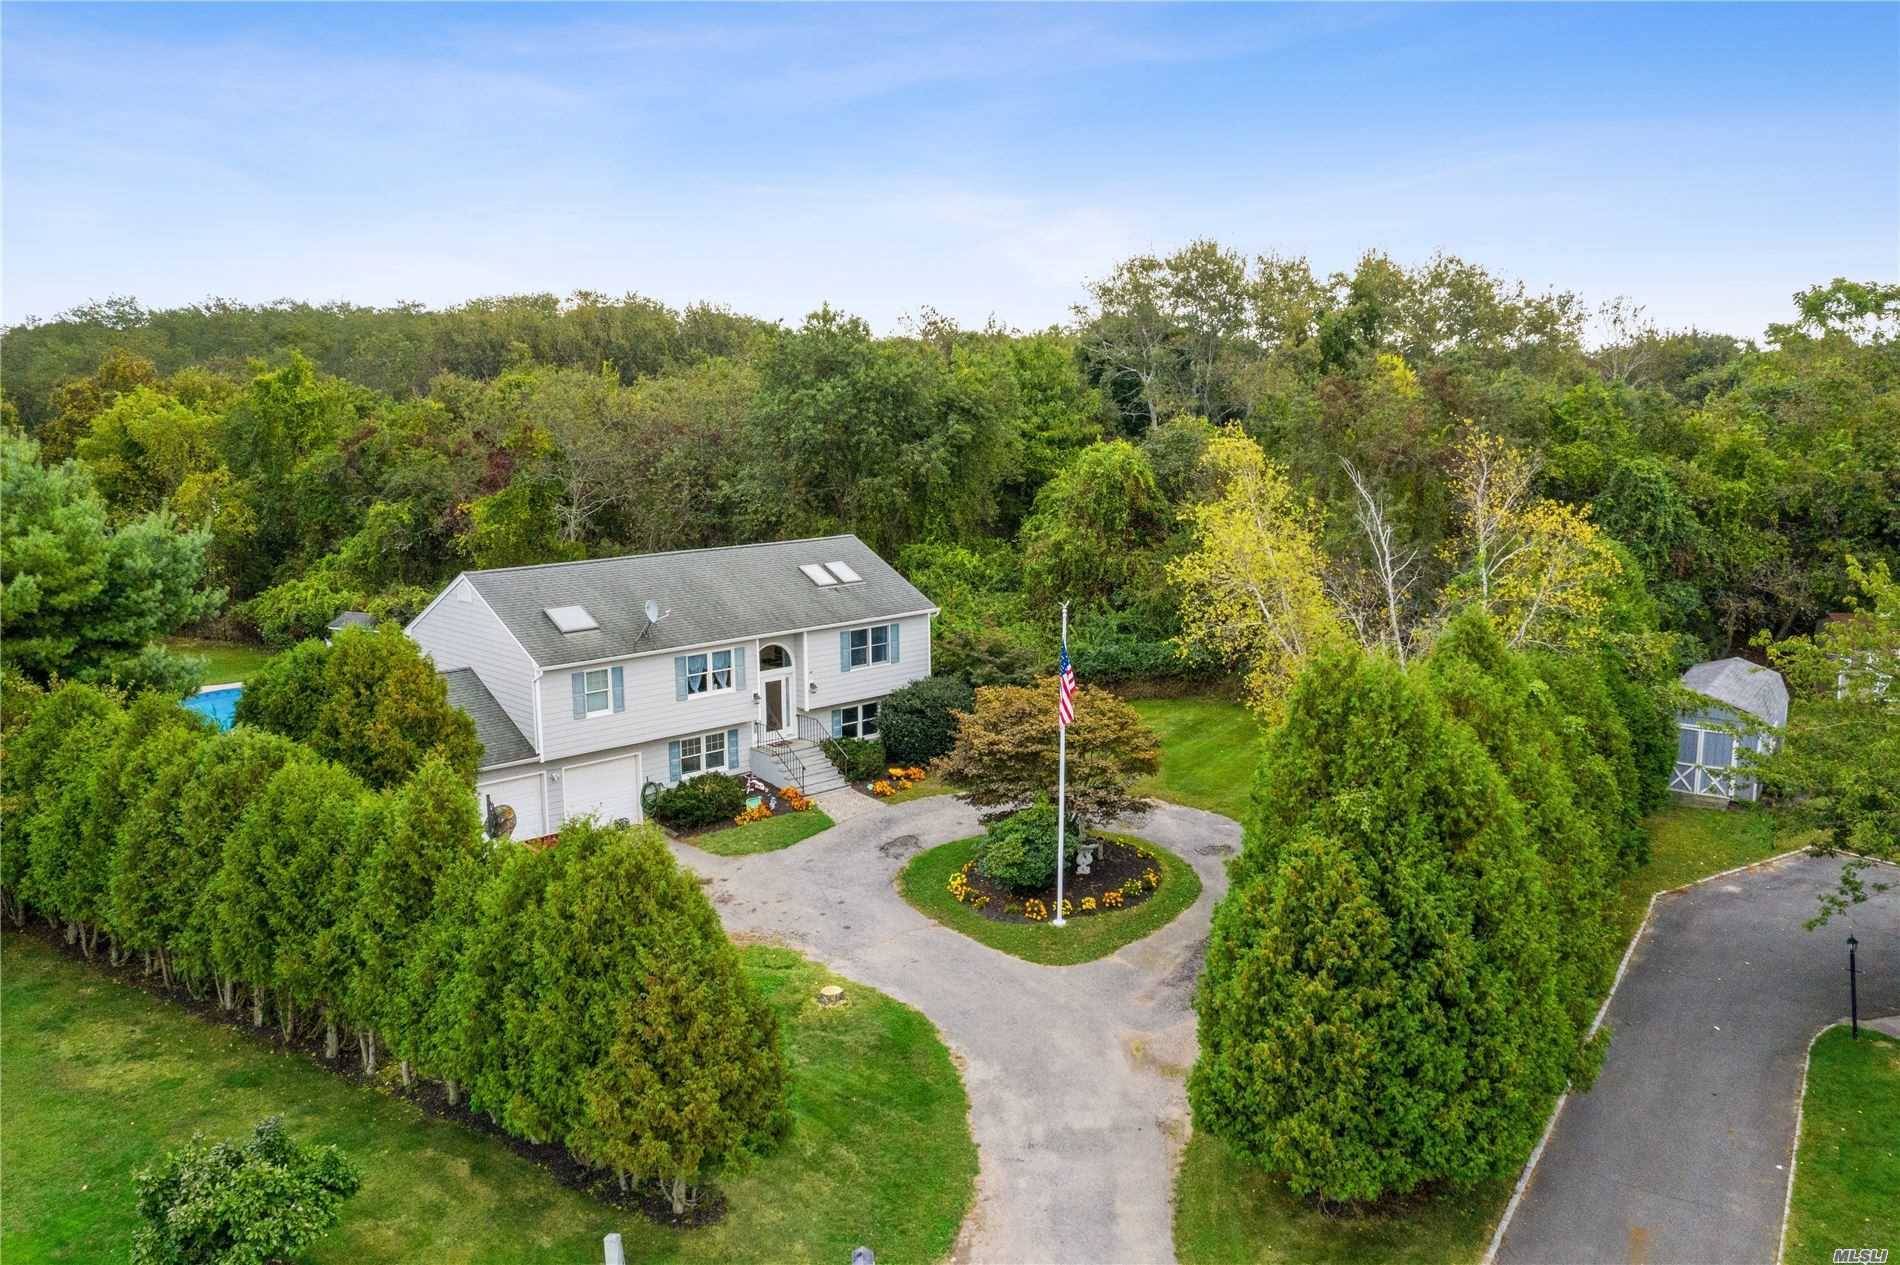 Tucked in the back of a cul de sac and surrounded by 40 acres of wooded land this private property and spacious home is ideal for comfortably entertaining large groups.